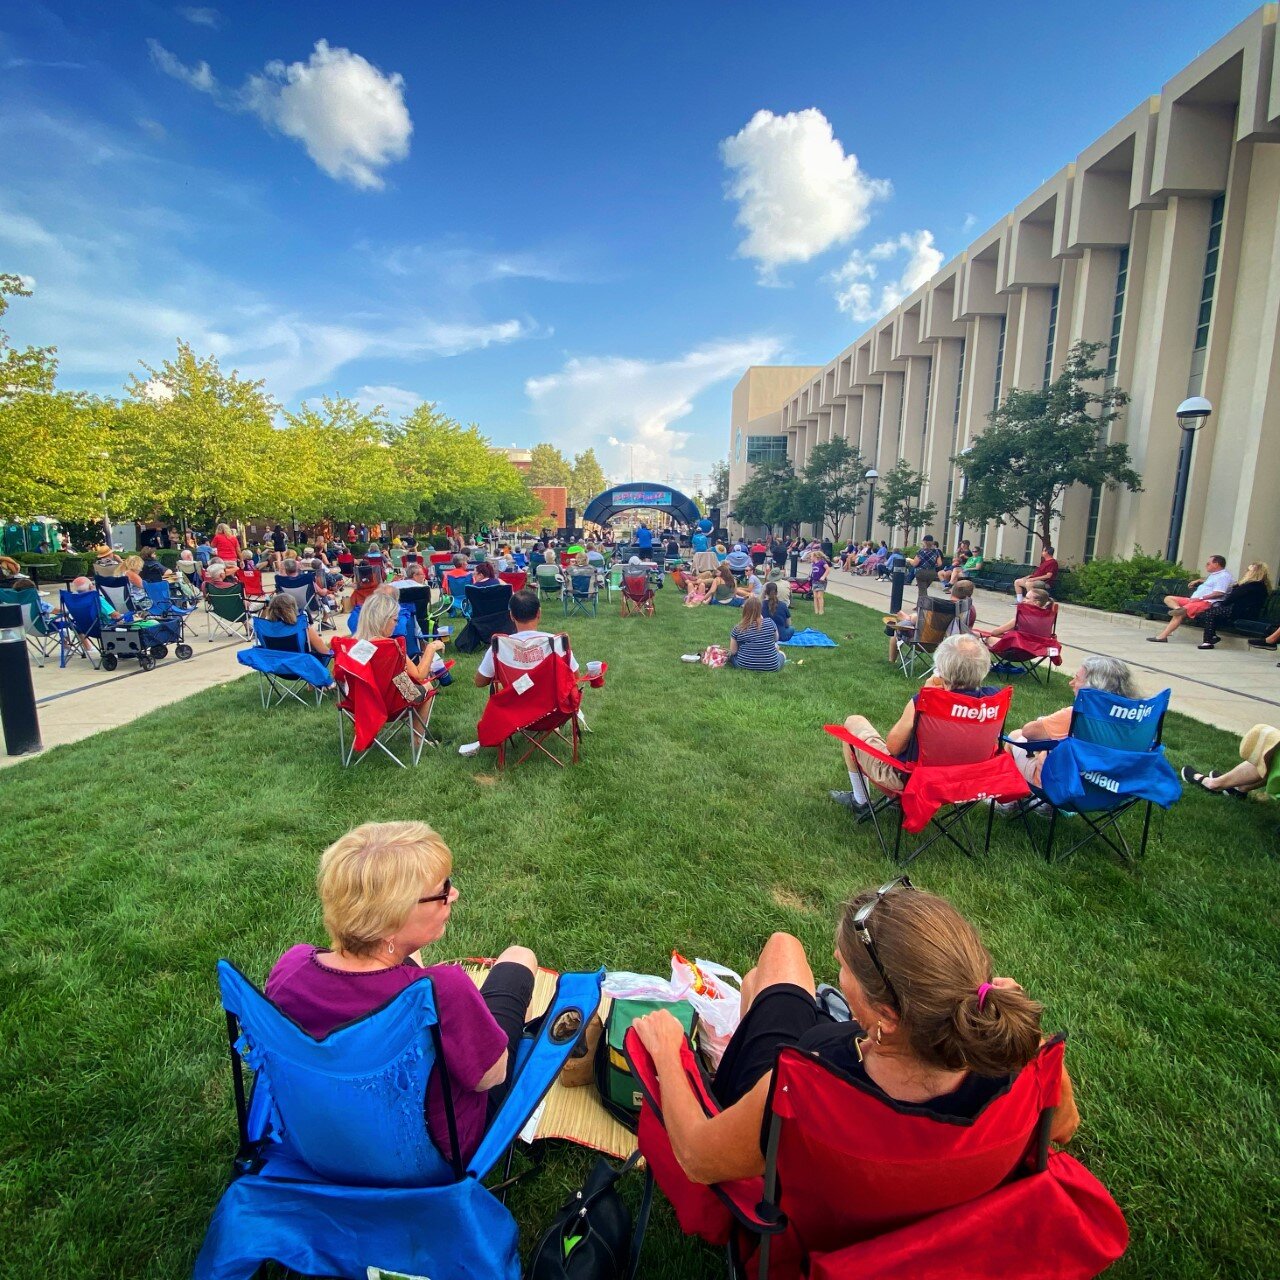 Rock the Plaza takes place every Saturday night from June through August, starting at 6 p.m. on the plaza outside the Allen County Public Library's Main Branch.